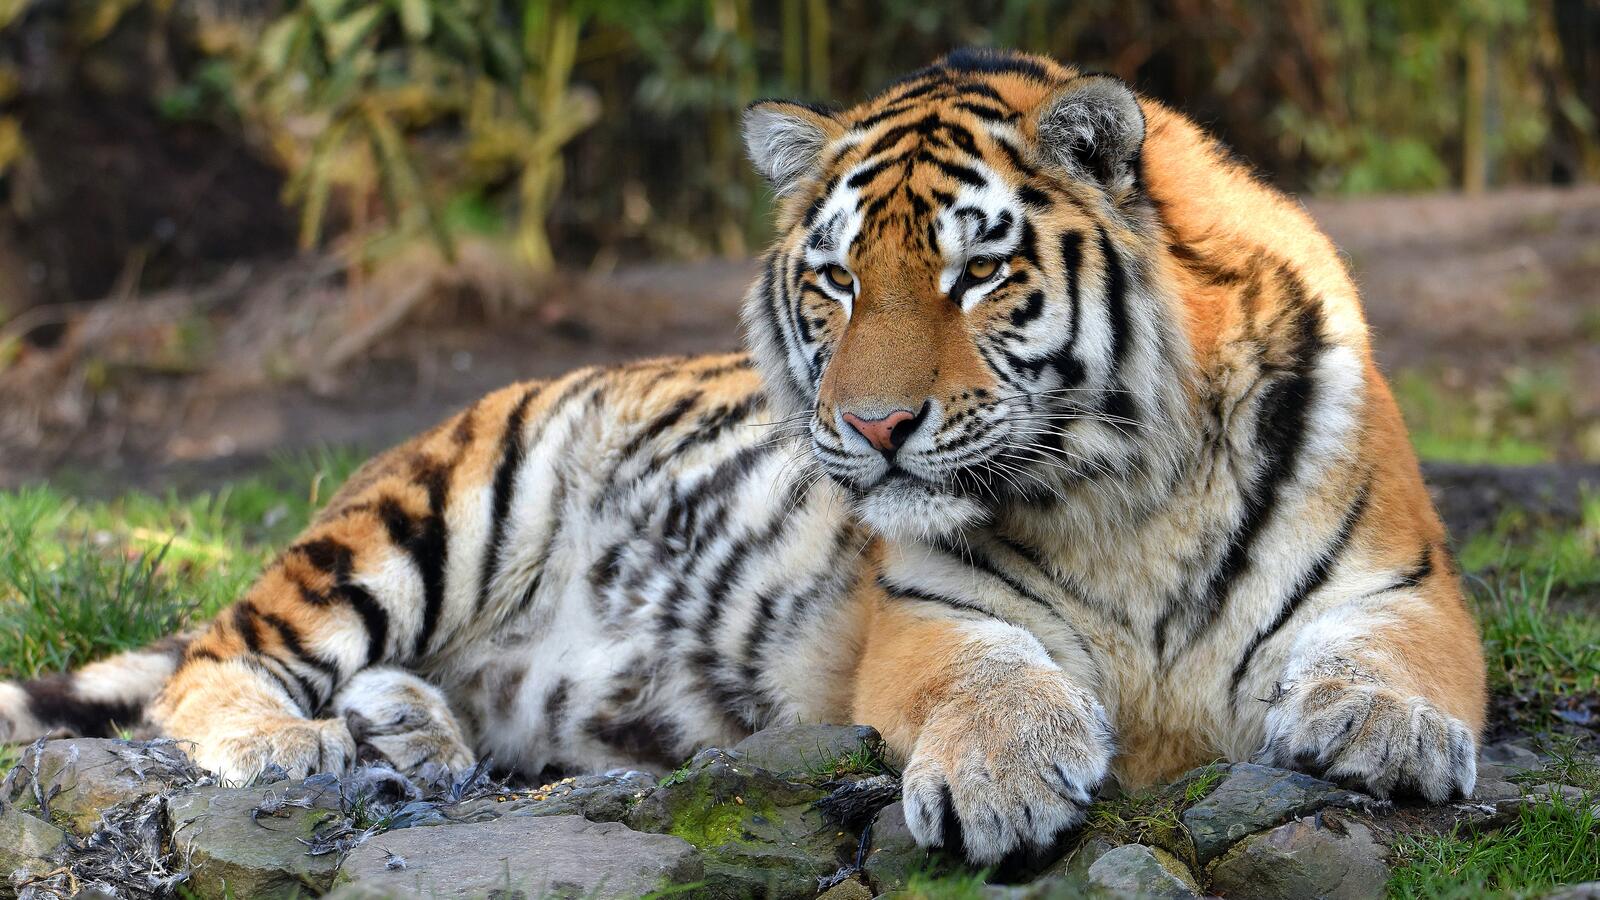 Free photo A striped tiger resting in a zoo